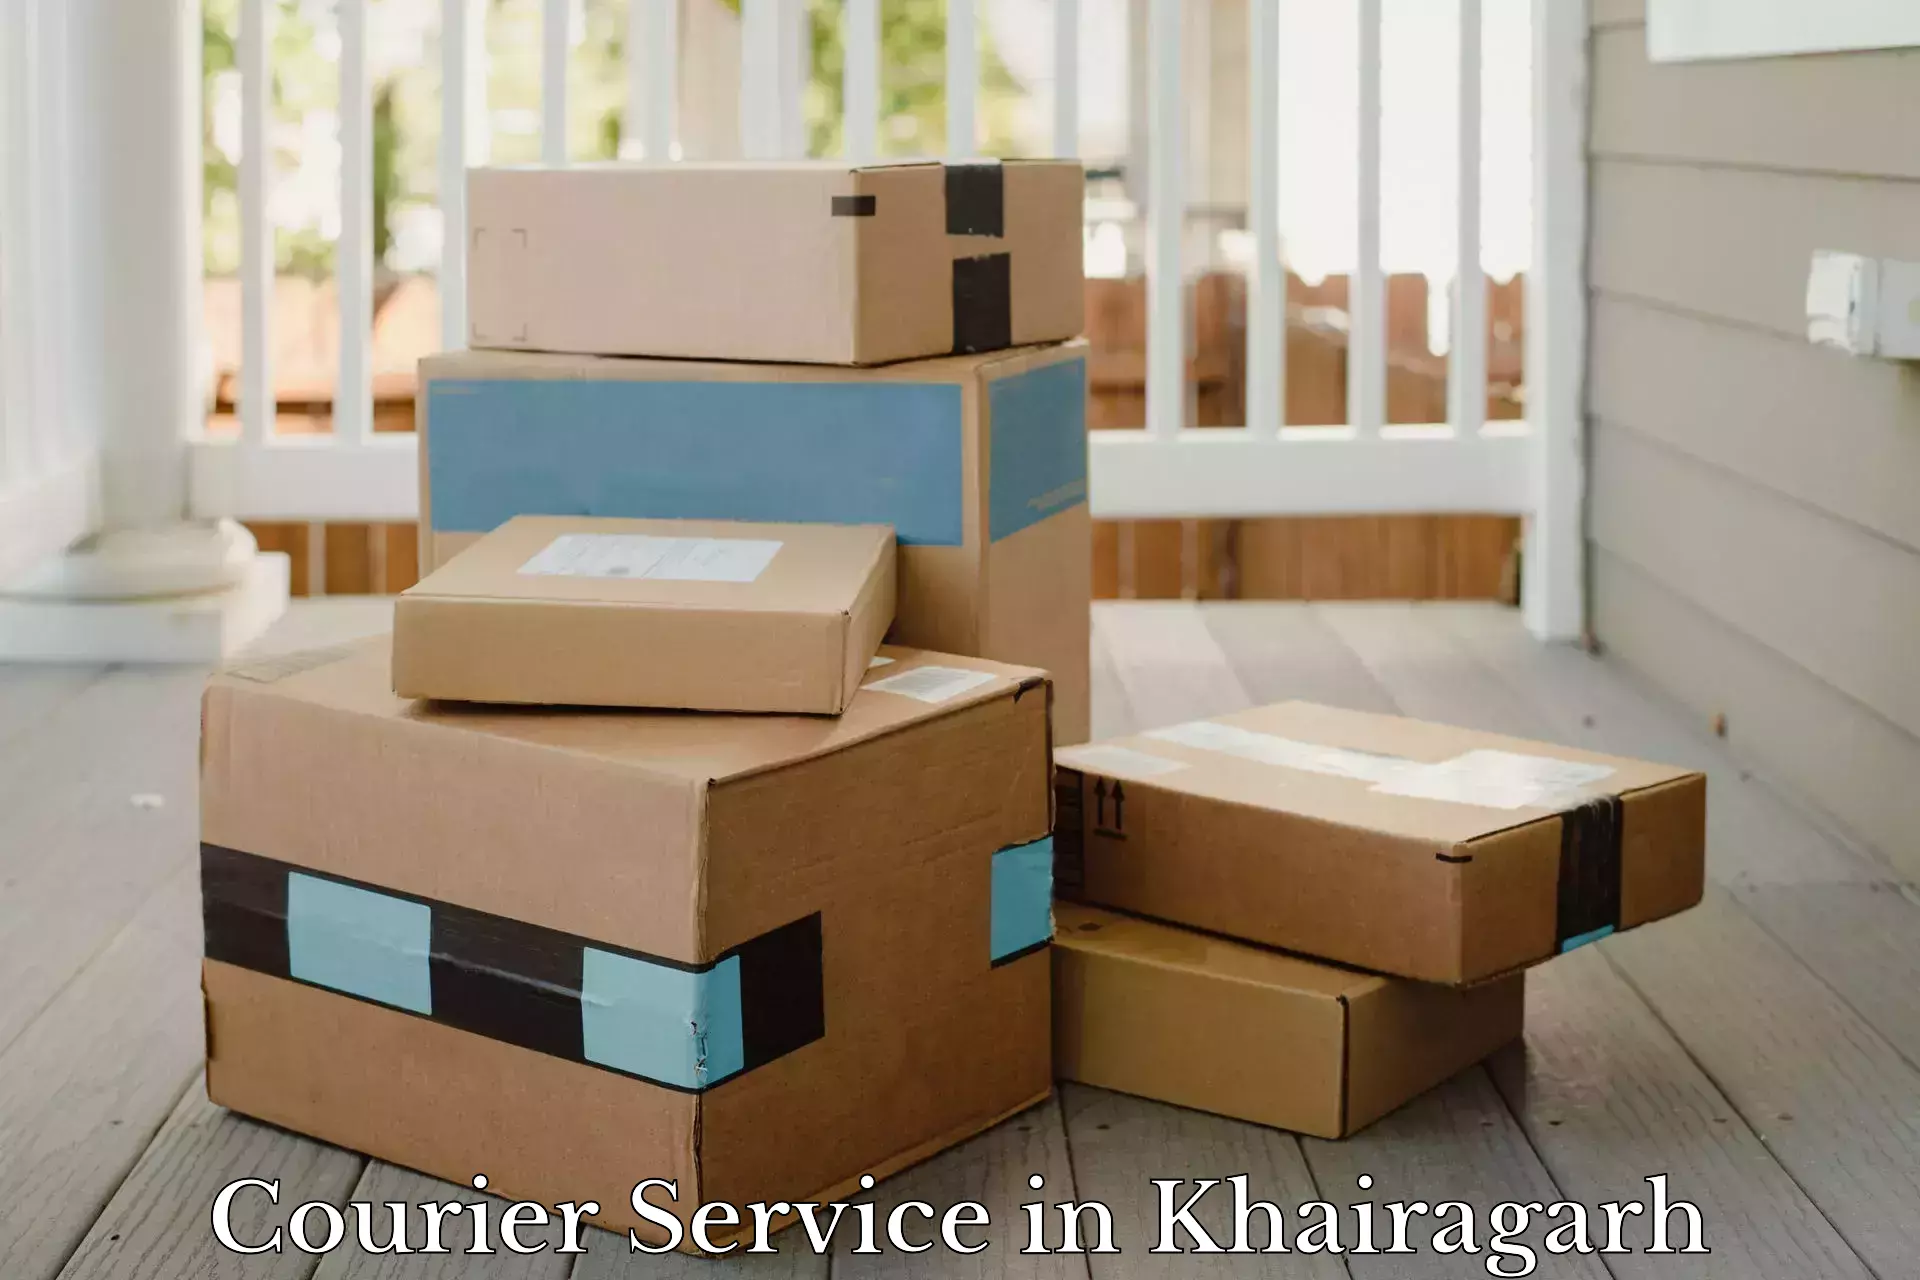 Tailored shipping services in Khairagarh